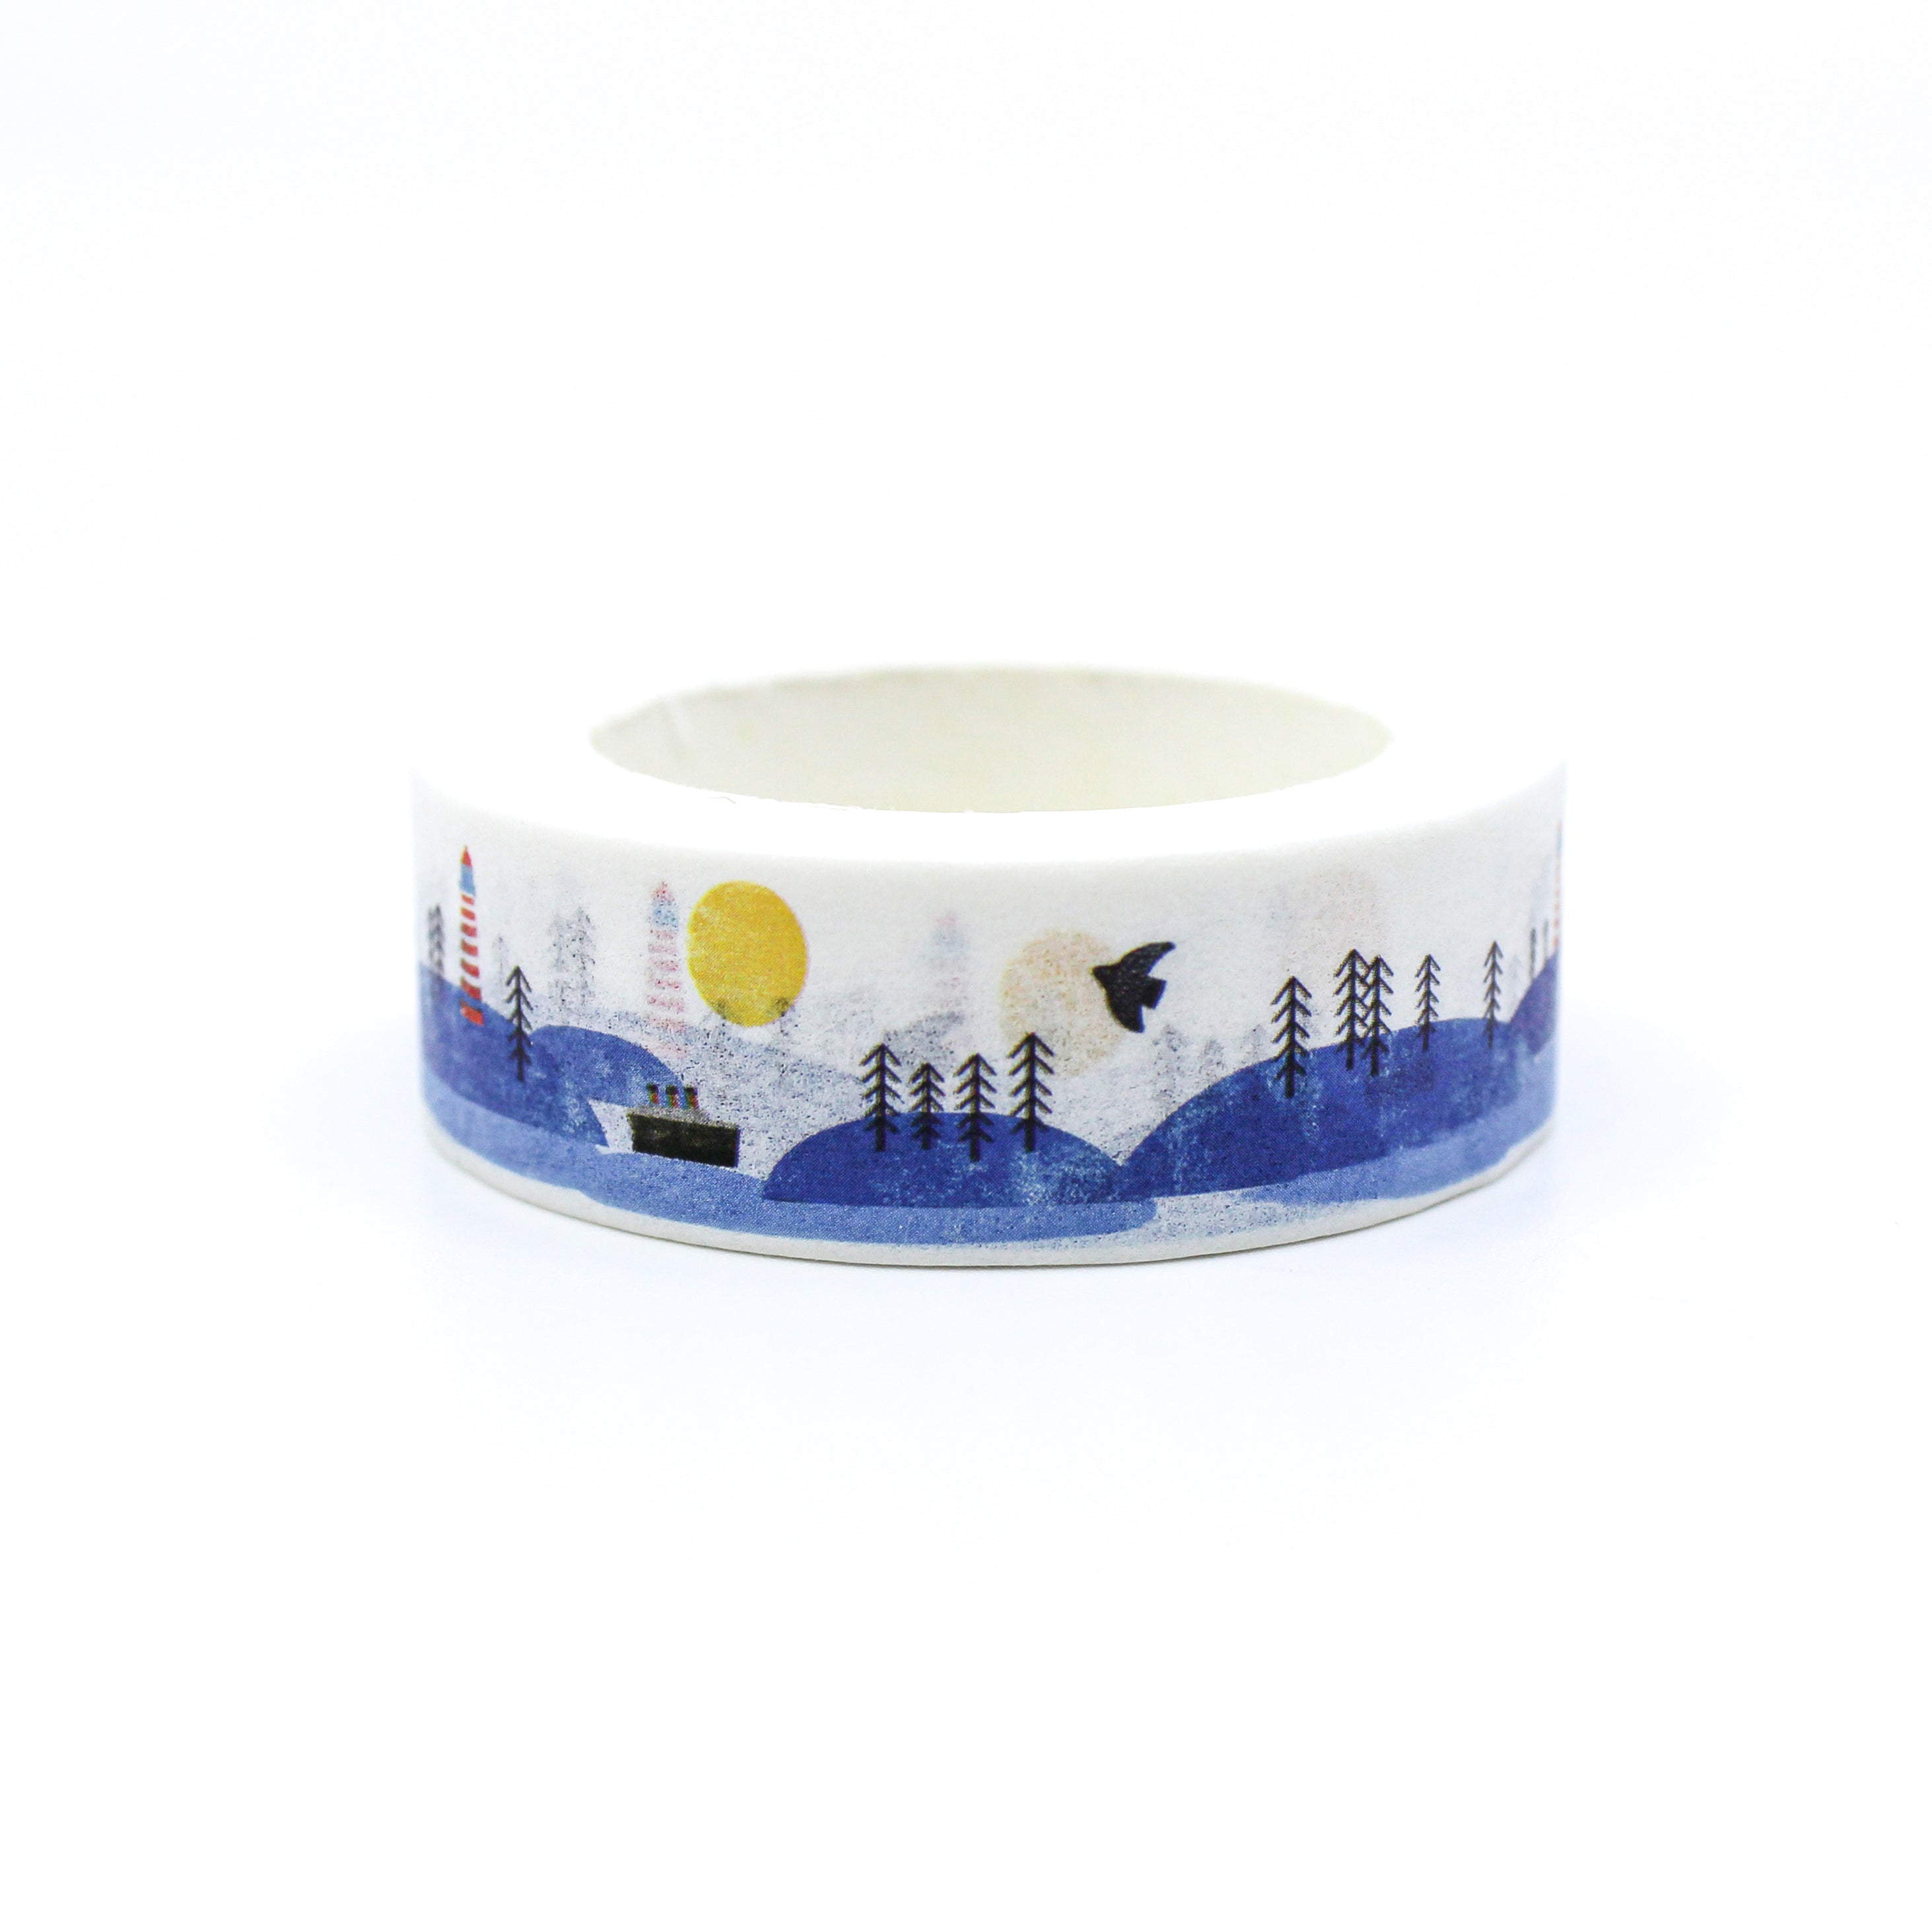 This is a nice view of Nordic blue ocean waterway with ships scenery washi tape from BBB Supplies Craft Shop